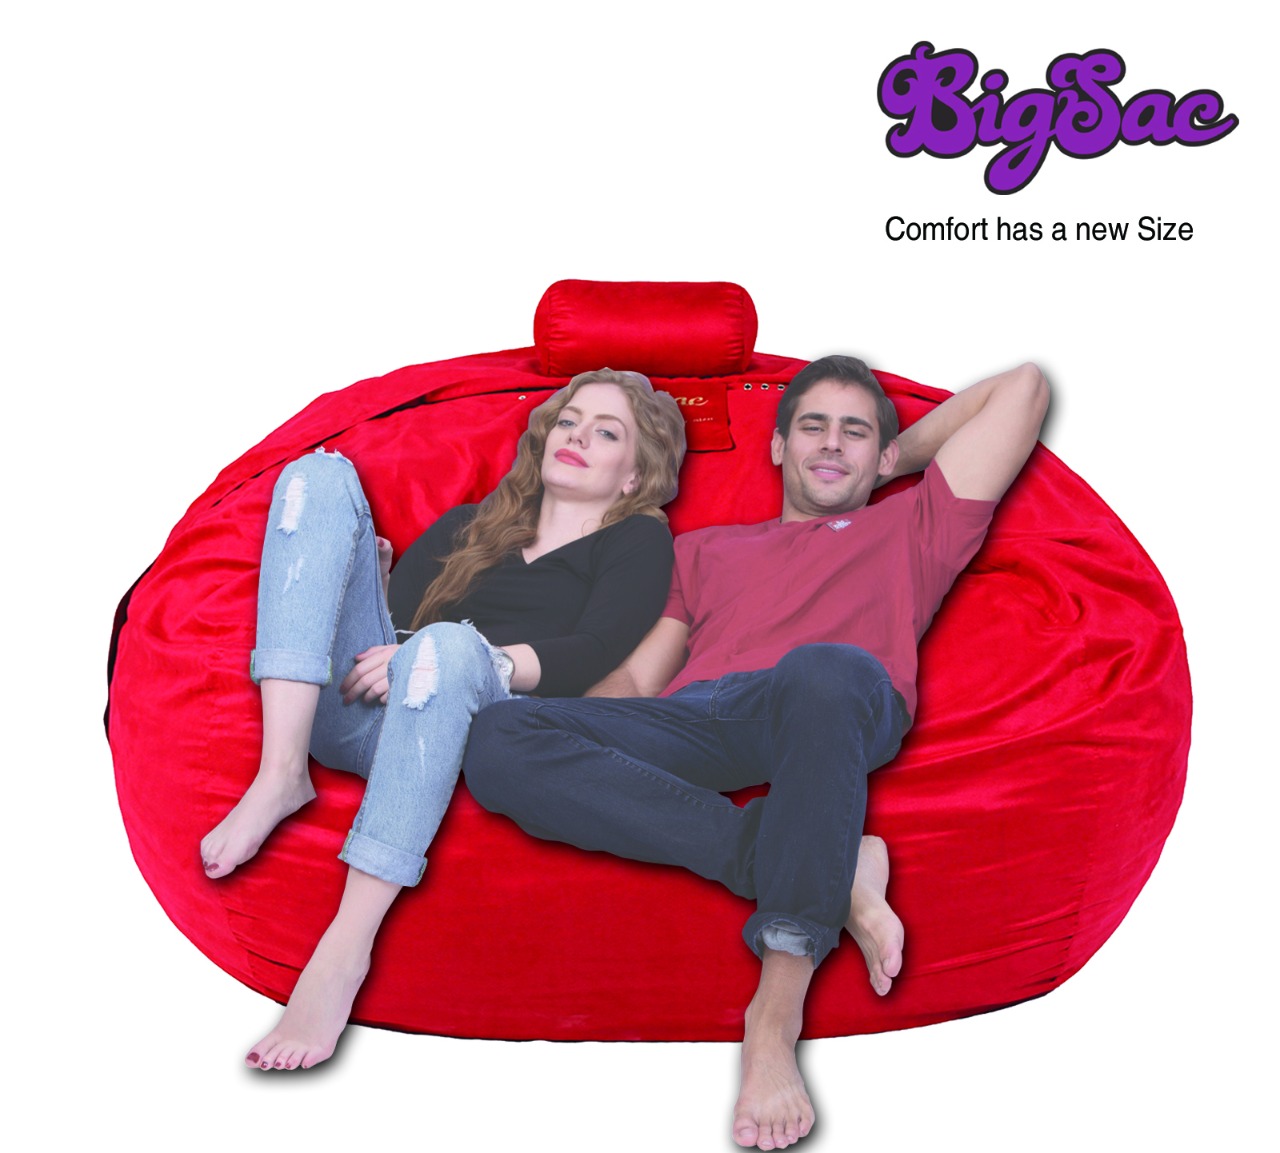 Big Sac 3.5 Feet Love Sac Premium Suede Fabric Filled Red Color - 5 Years Warranty        